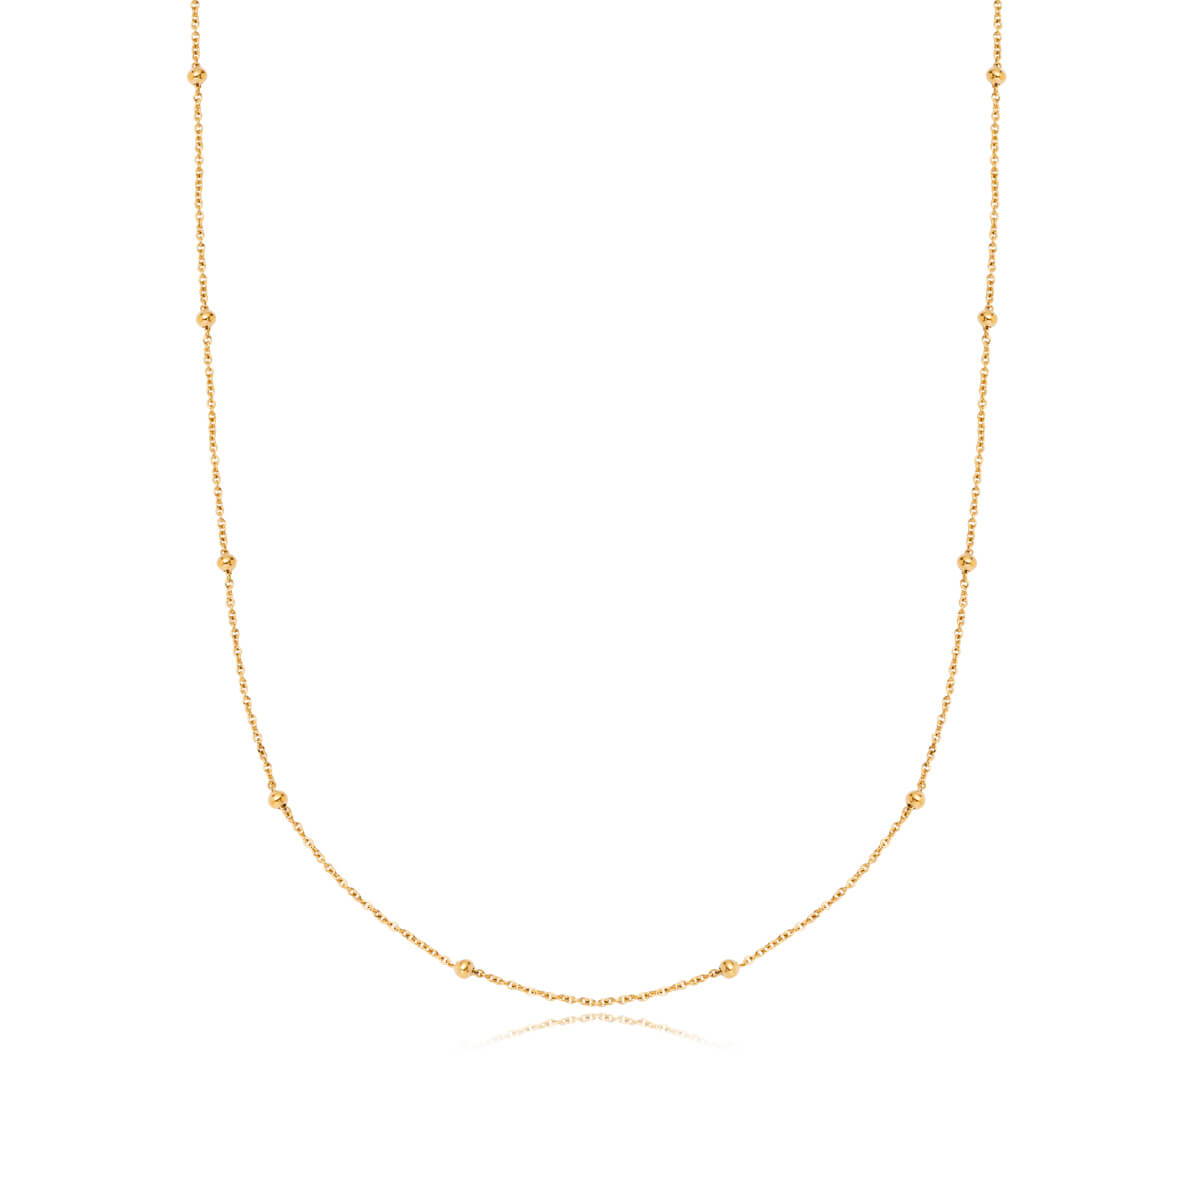 Sphere Chain Necklace (Gold)